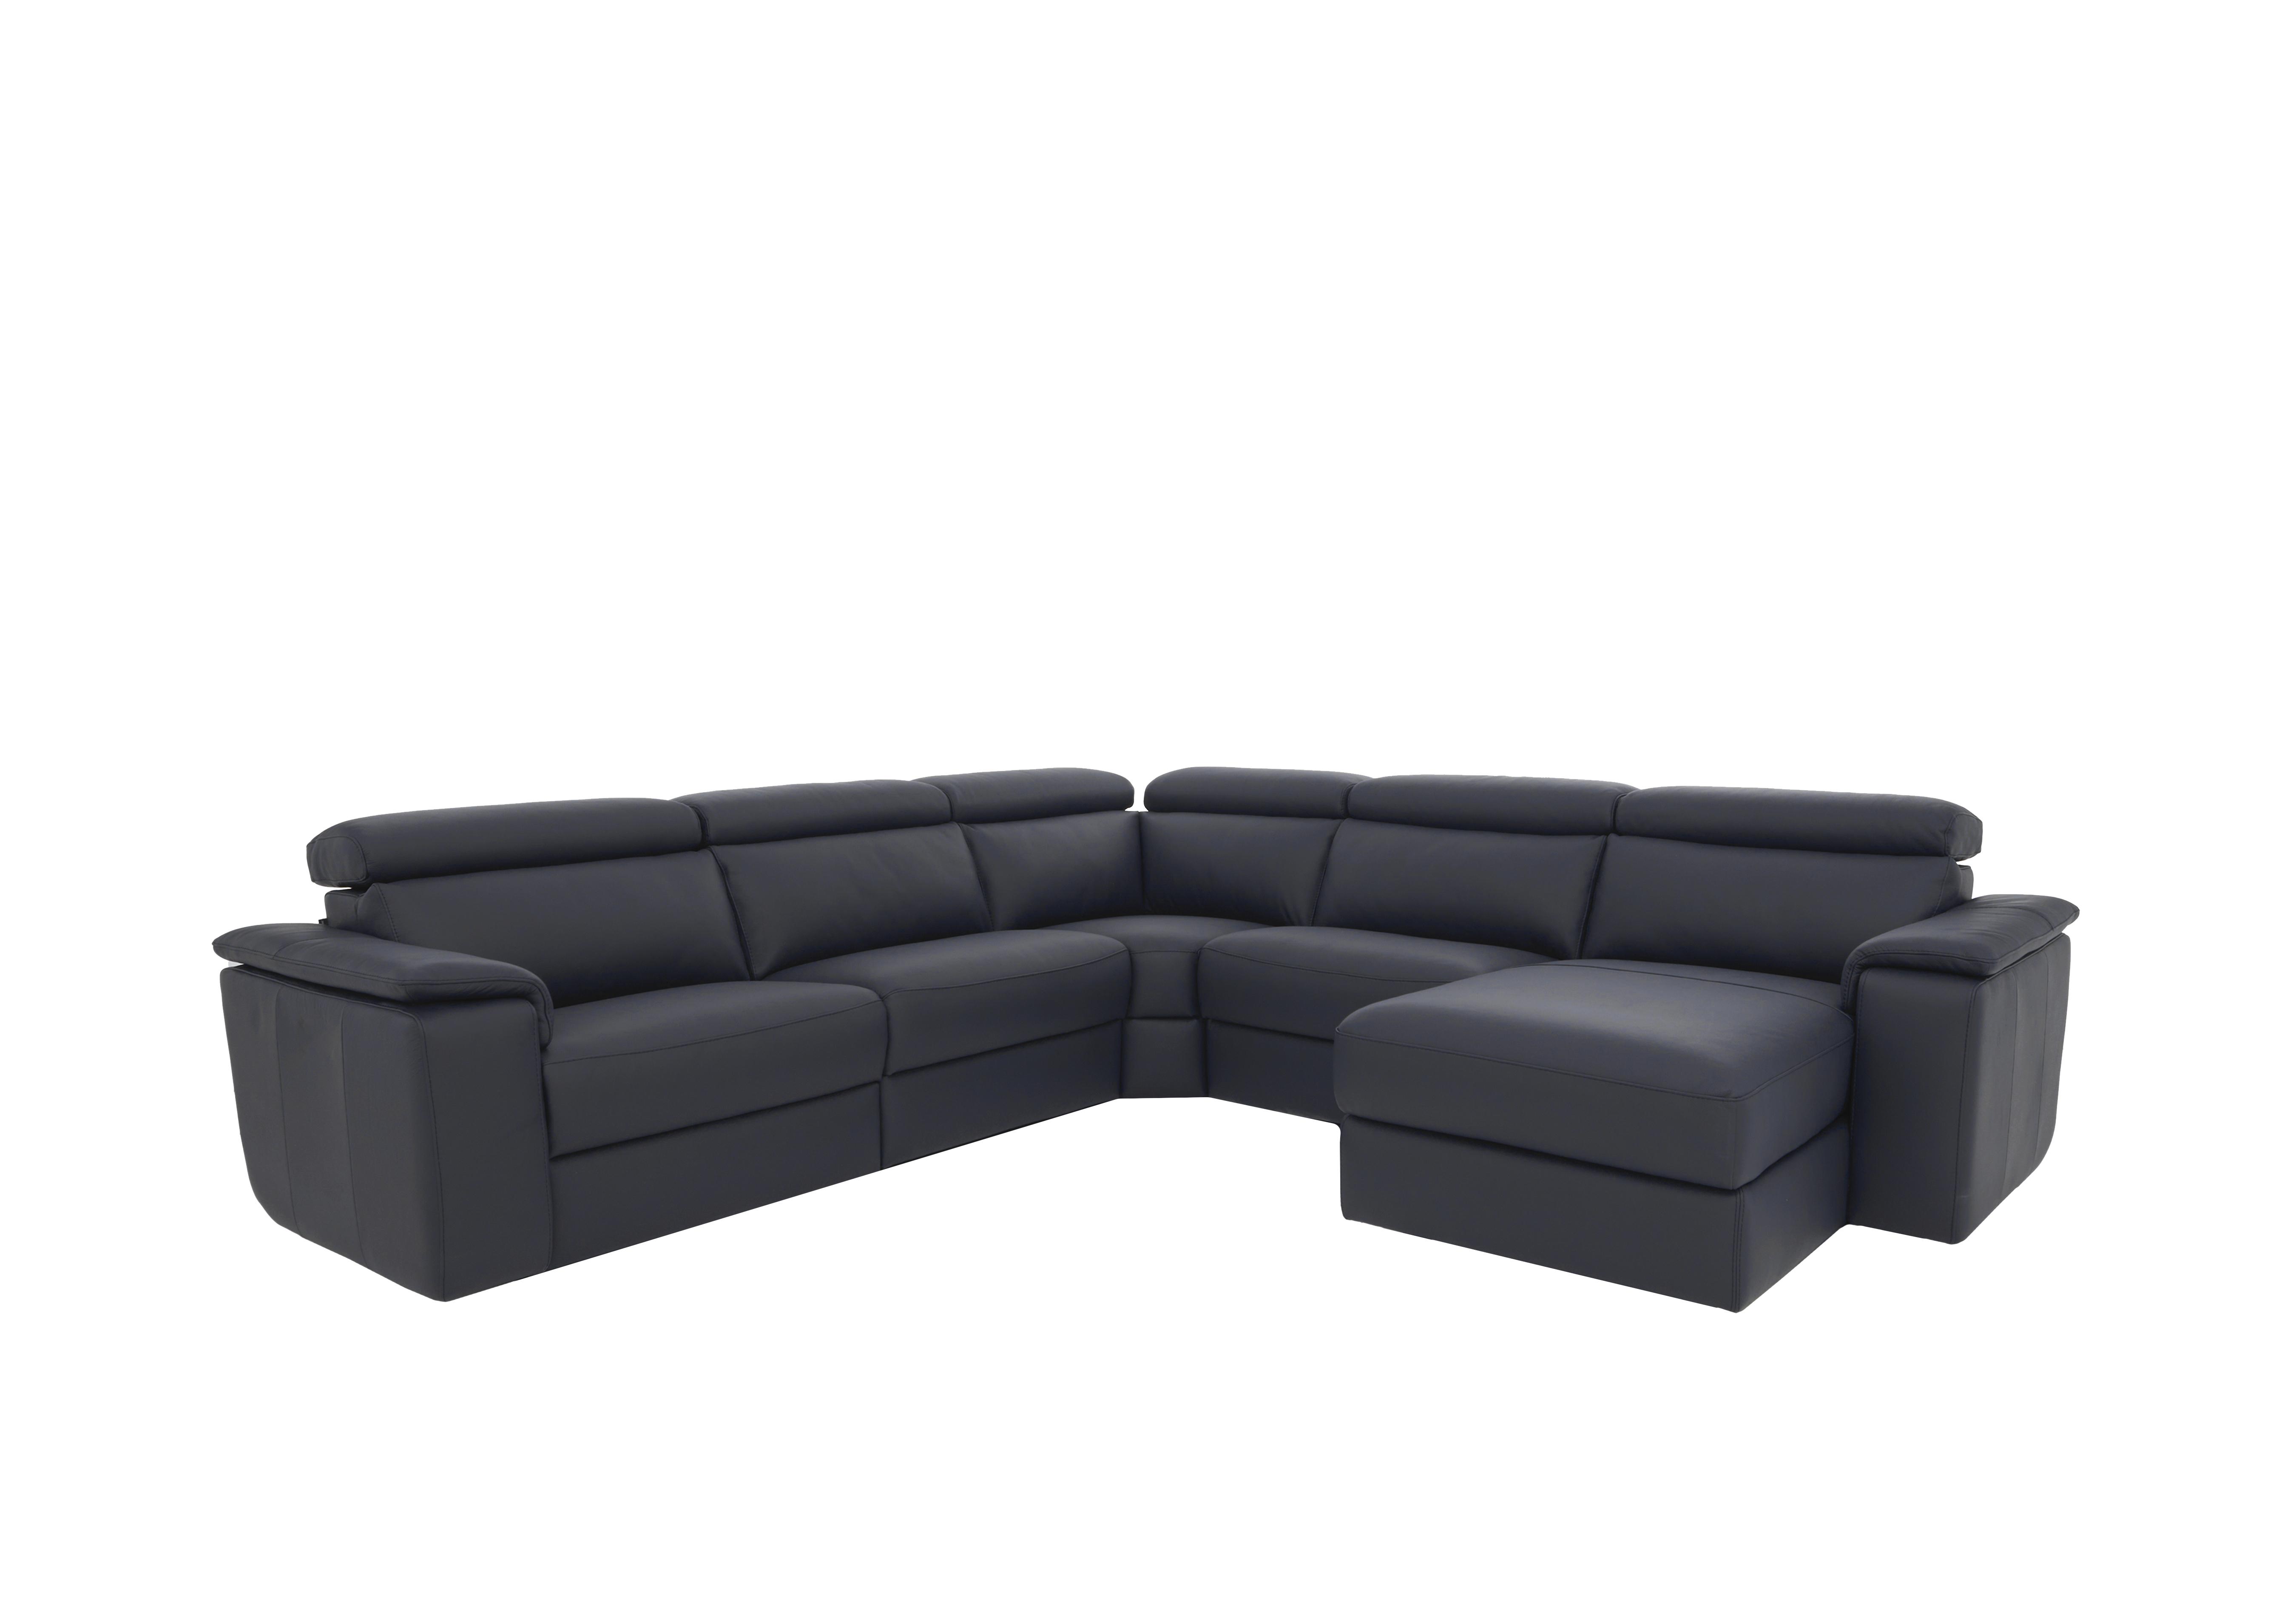 Davide Large Leather Corner Sofa with Chaise End in 81 Torello Blu on Furniture Village